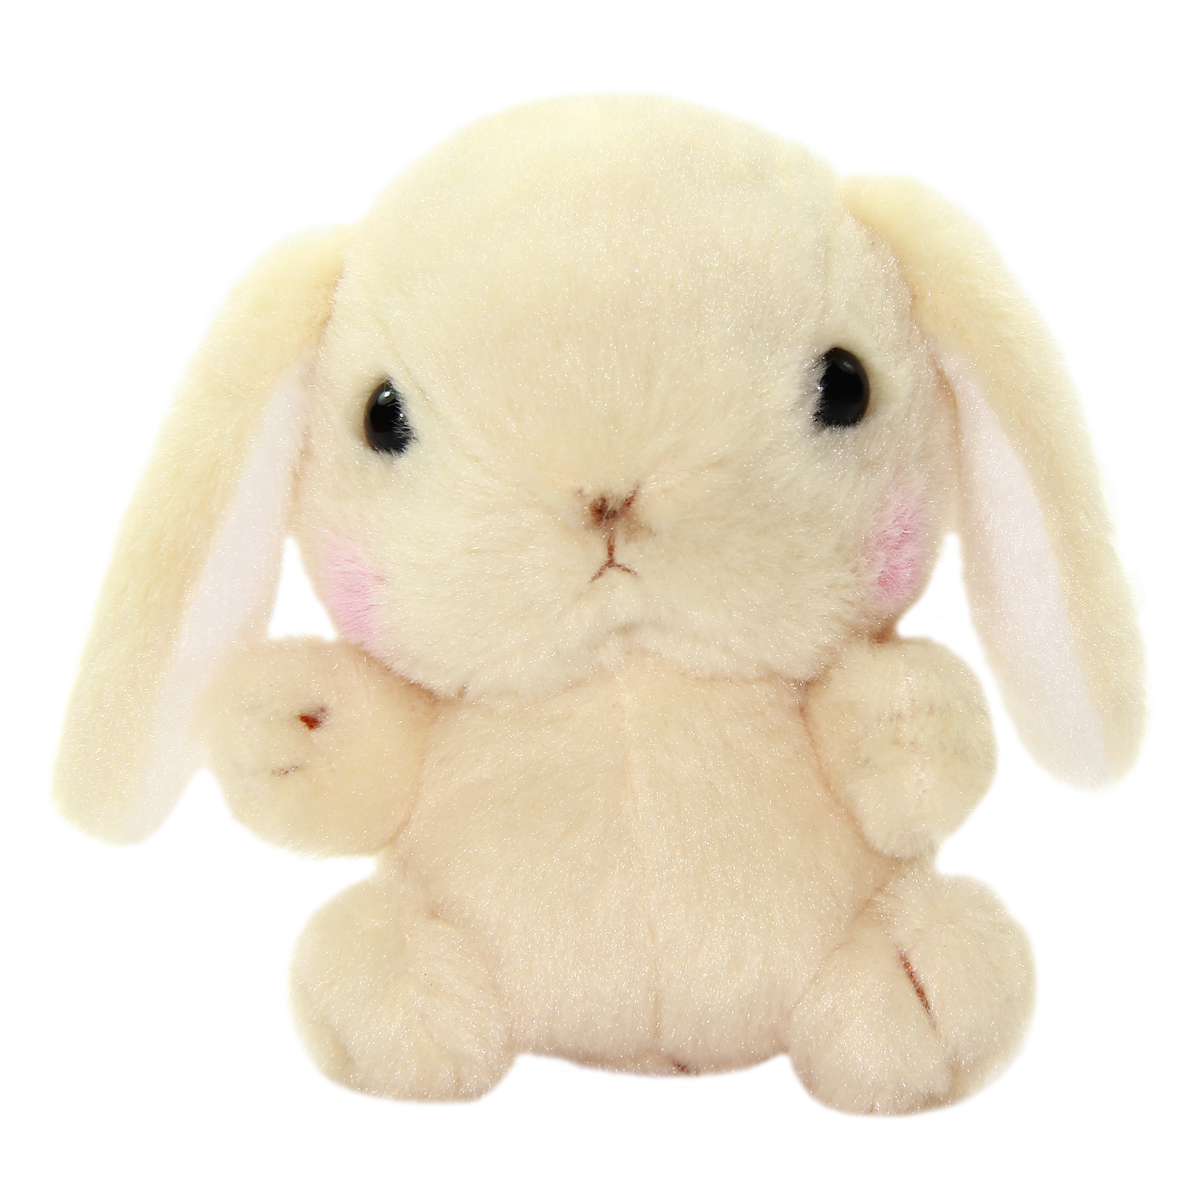 Amuse Bunny Plushie Cute Stuffed Animal Toy Beige 5 Inches